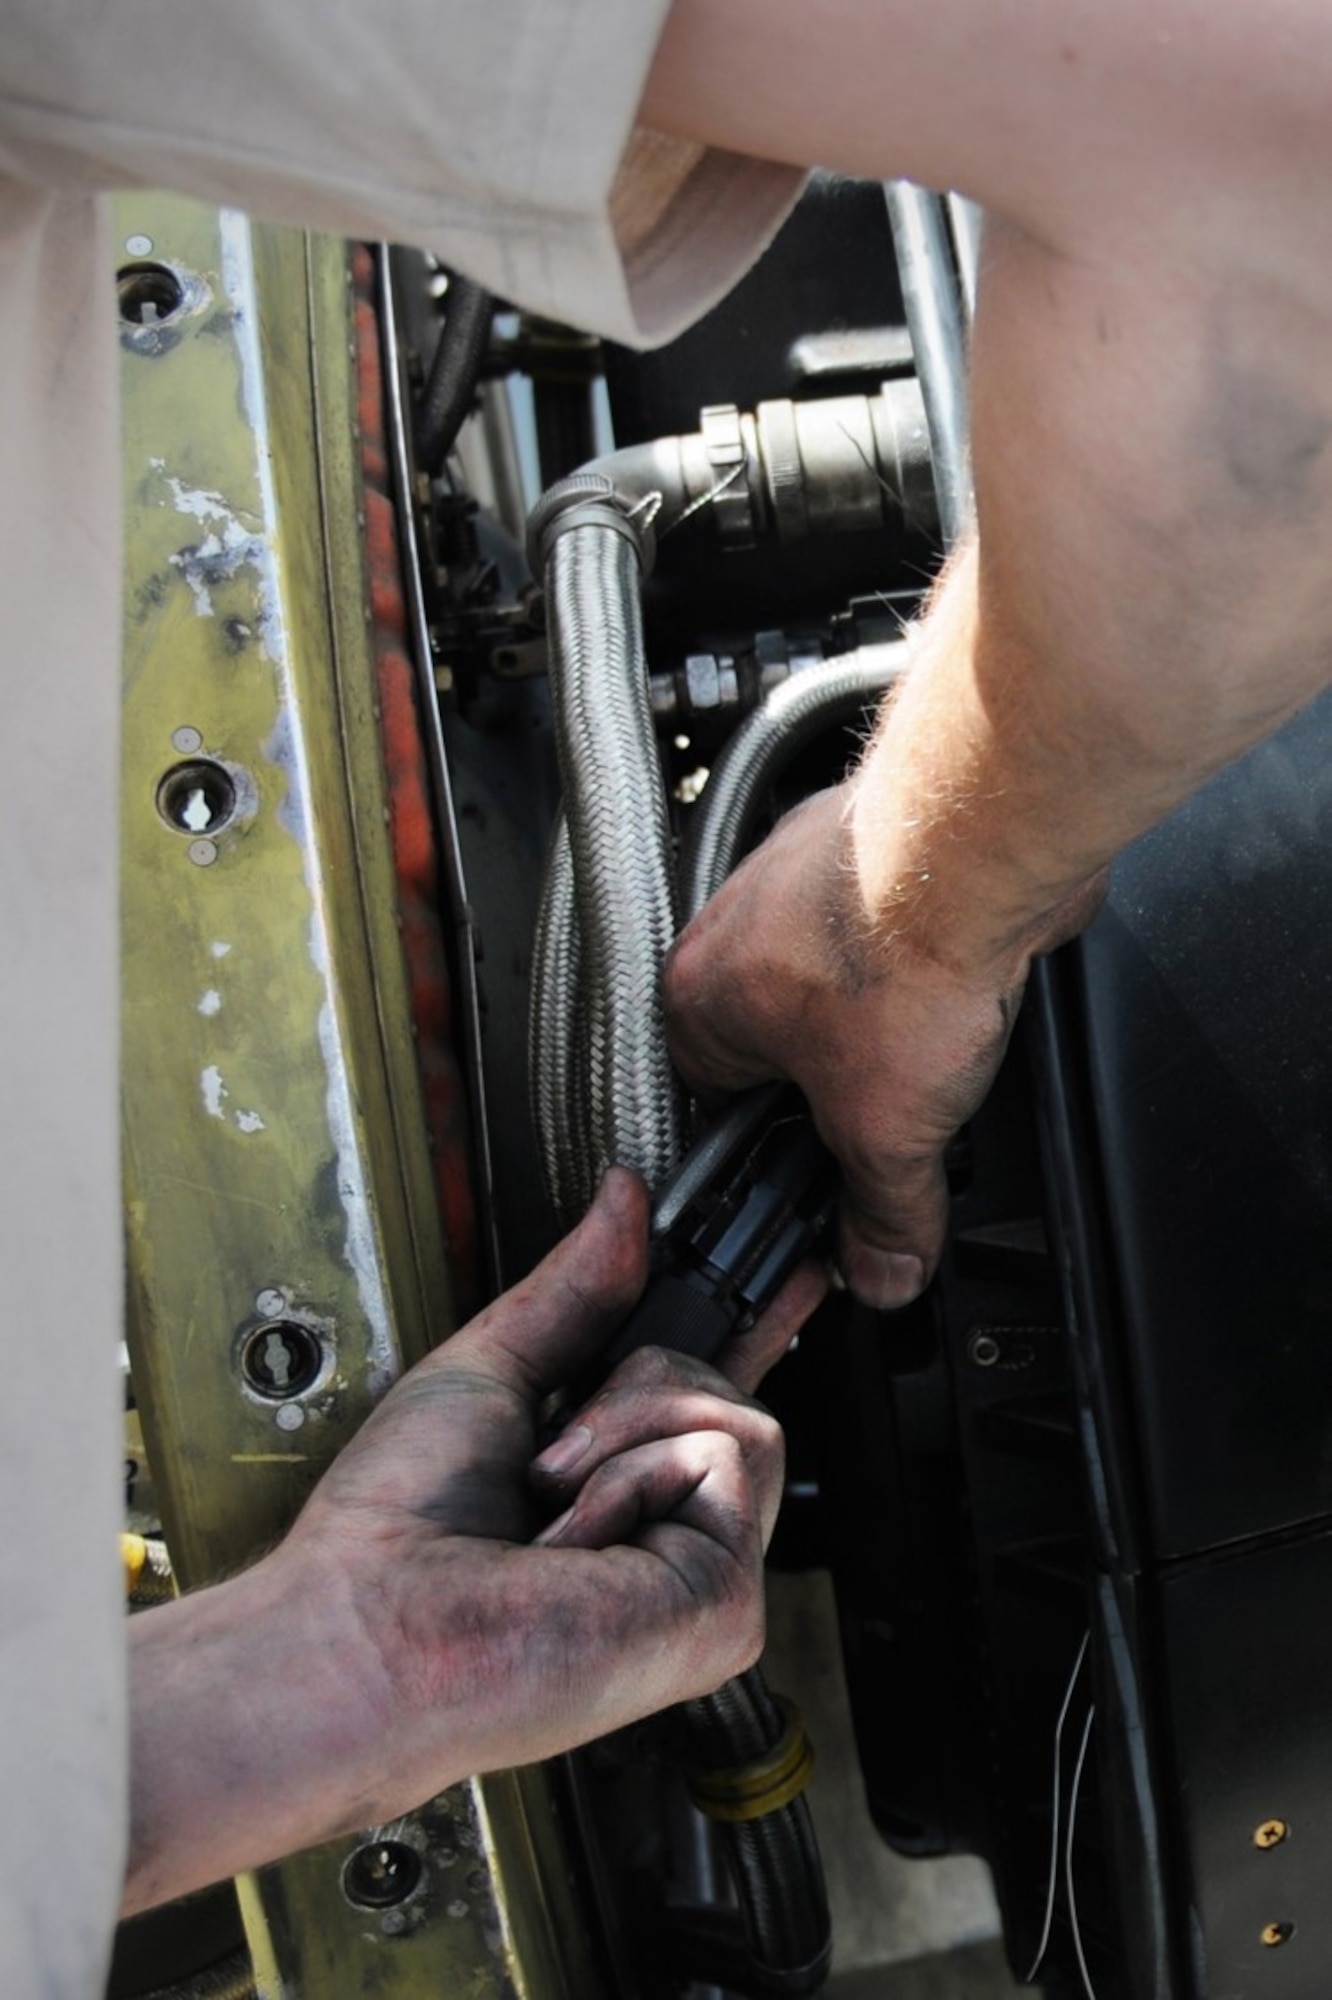 Senior Airman Jeremy Putman, 94th Aircraft Maintenance Squadron aerospace propulsion technician, performs maintenance on a C-130 in Amman, Jordan, May 15, 2016, in support of Exercise Eager Lion. This year Eager Lion was a bilateral exercise including U.S. and Jordanian military forces, held May 15-24. (U.S. Air Force photo/Staff Sgt. Alan Abernethy)
